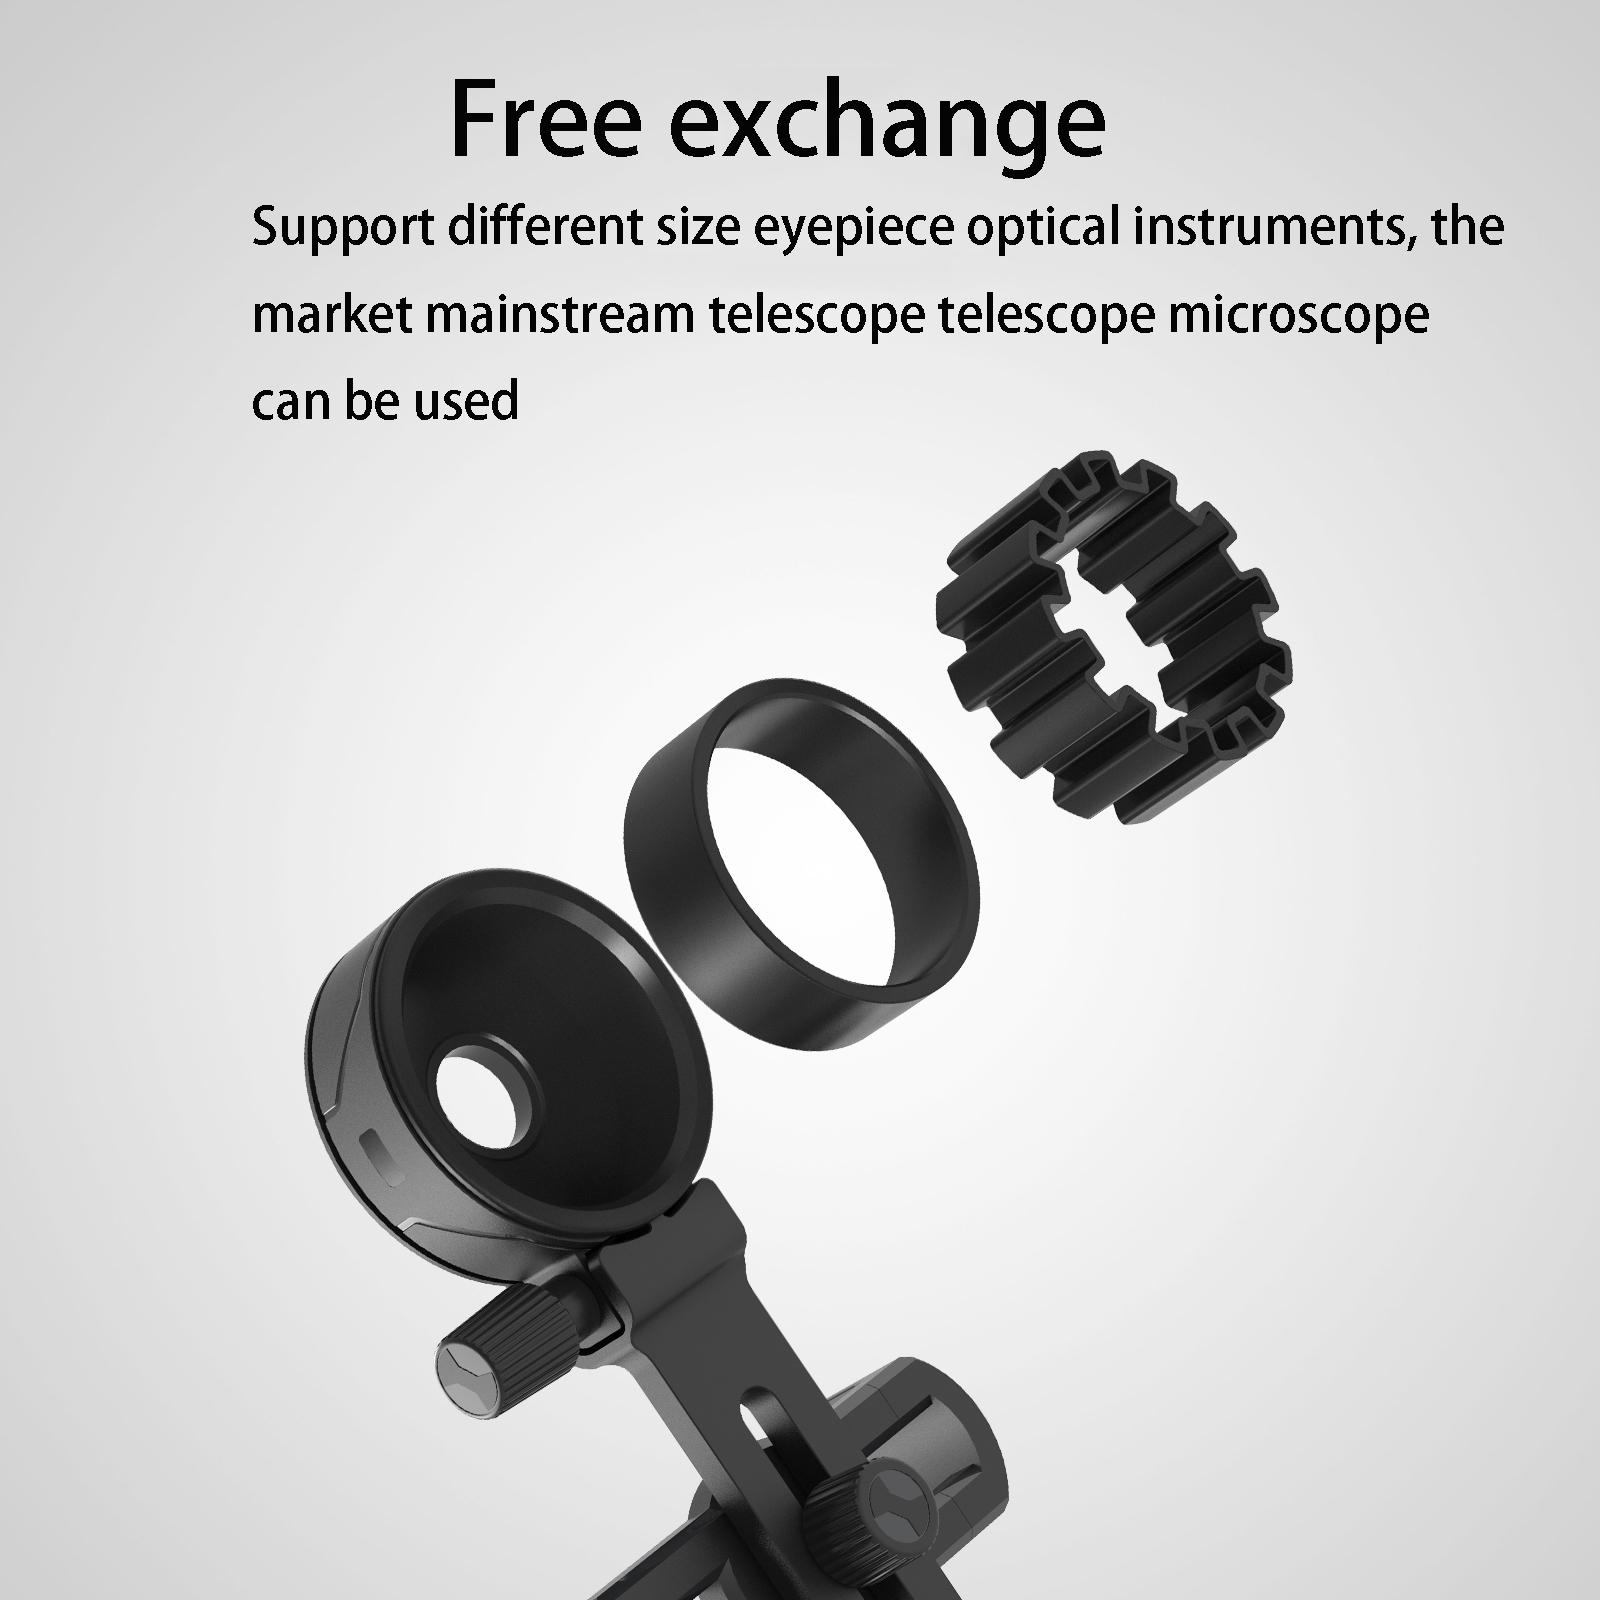 Cell-Phone-Adapter-with-Spring-Clamp-Mount-Monocular-Microscope-Accessories-Adapt-Telescope-Mobile-P-1762827-11